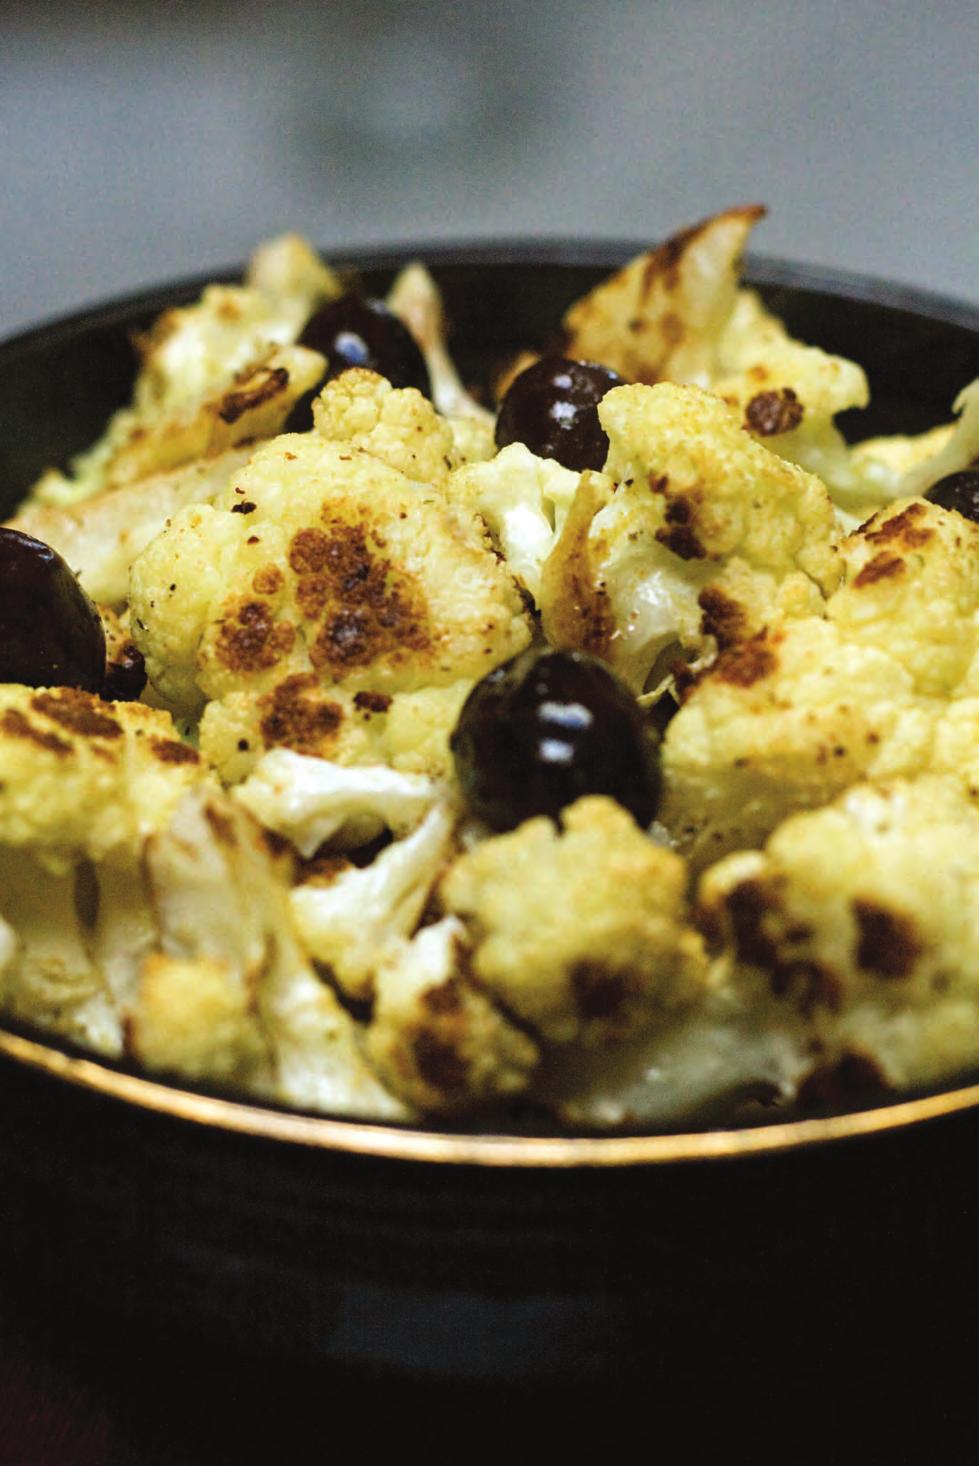 1 (12-oz) pkg Cauliflower Florets, or 4 cups cauliflower cut into florets 4 tsp olive oil ½ tsp 21 Seasoning Salute, or your favorite seasoning ½ cup Kalamata olives, about a dozen 1 Preheat oven to